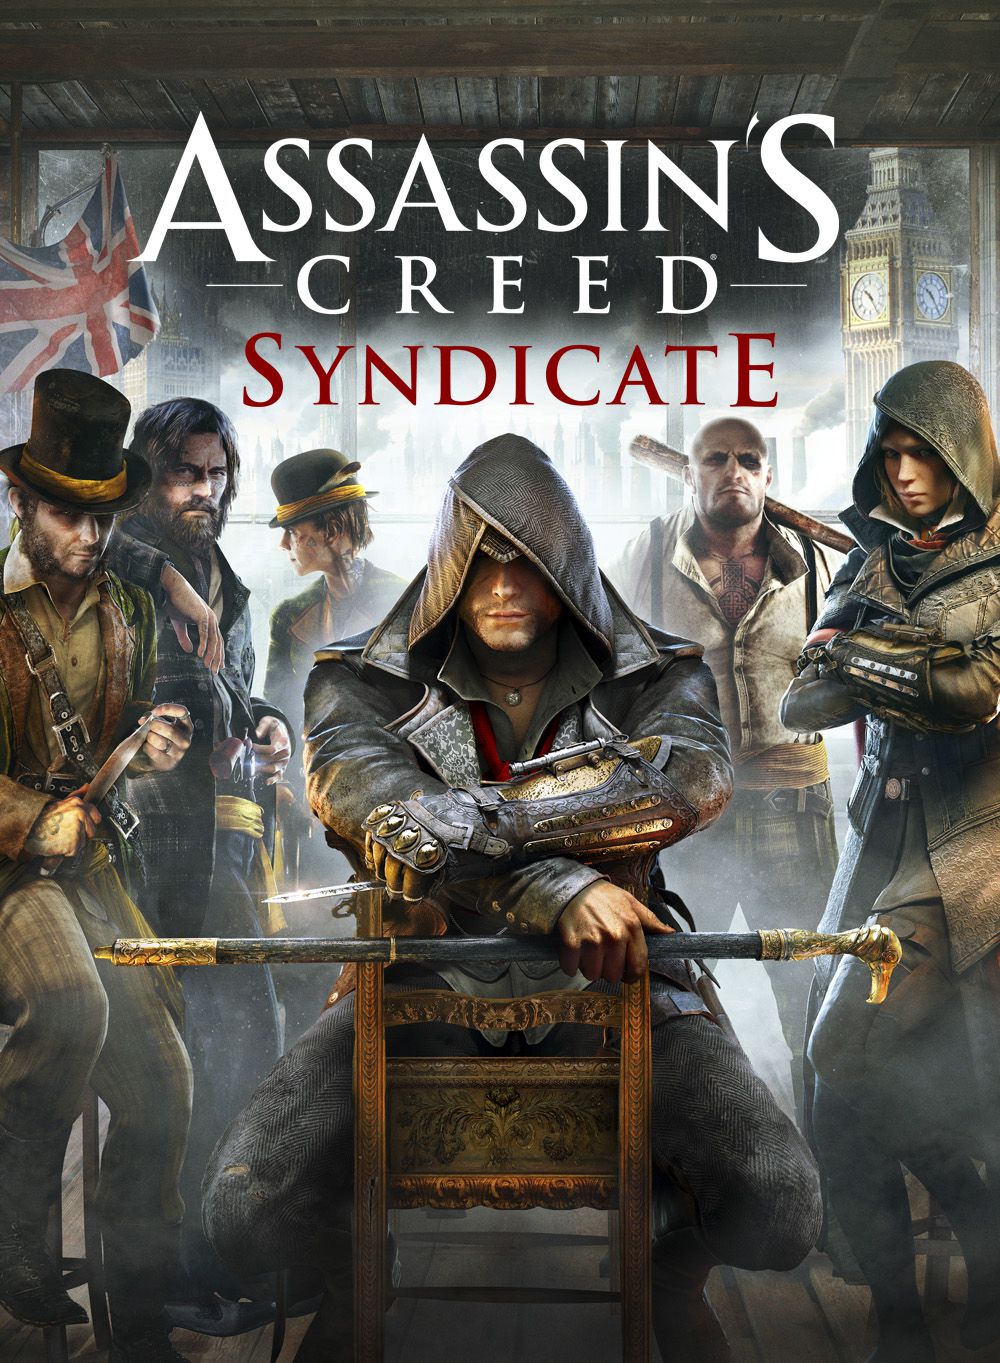 Assassin's Creed Syndicate (2015)  - Jeu vidéo streaming VF gratuit complet